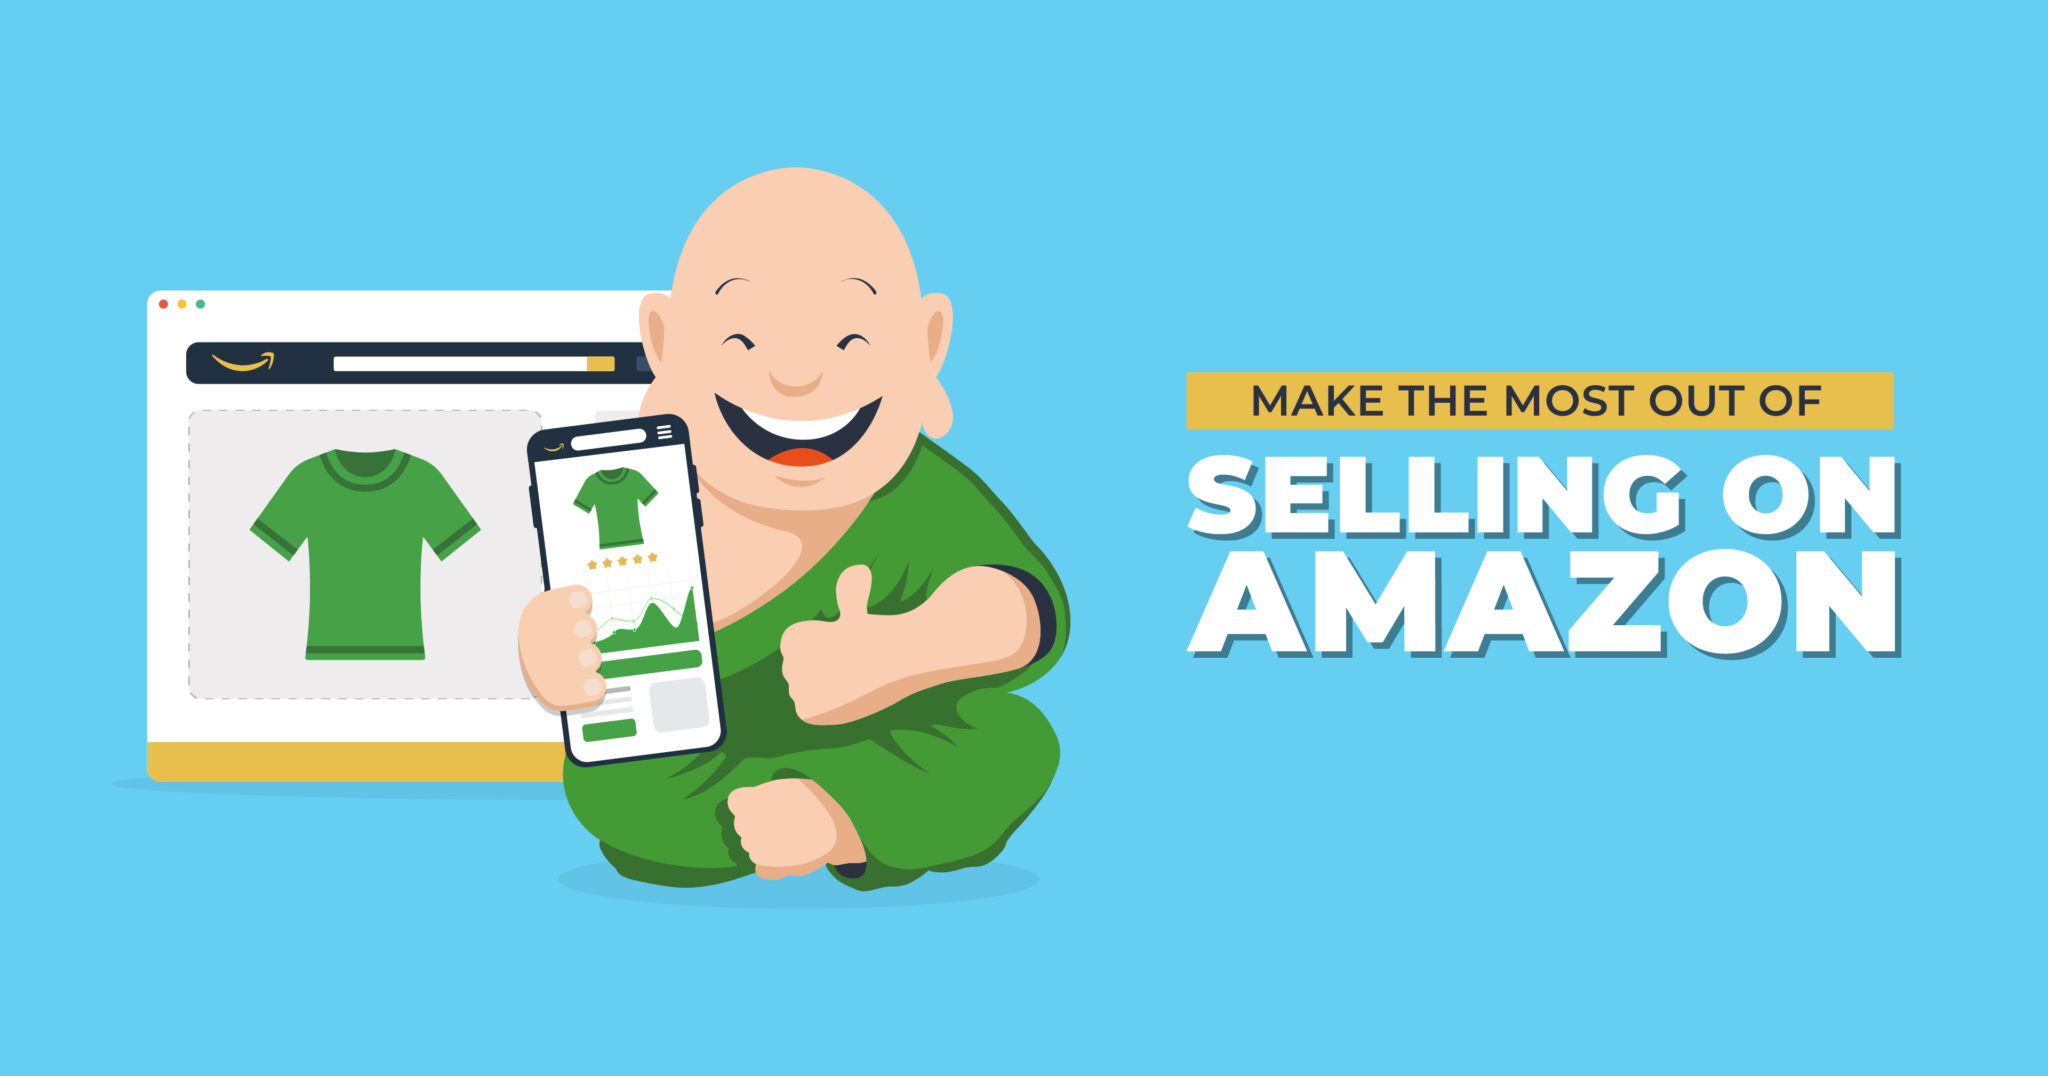 Make the Most Out of Selling on Amazon